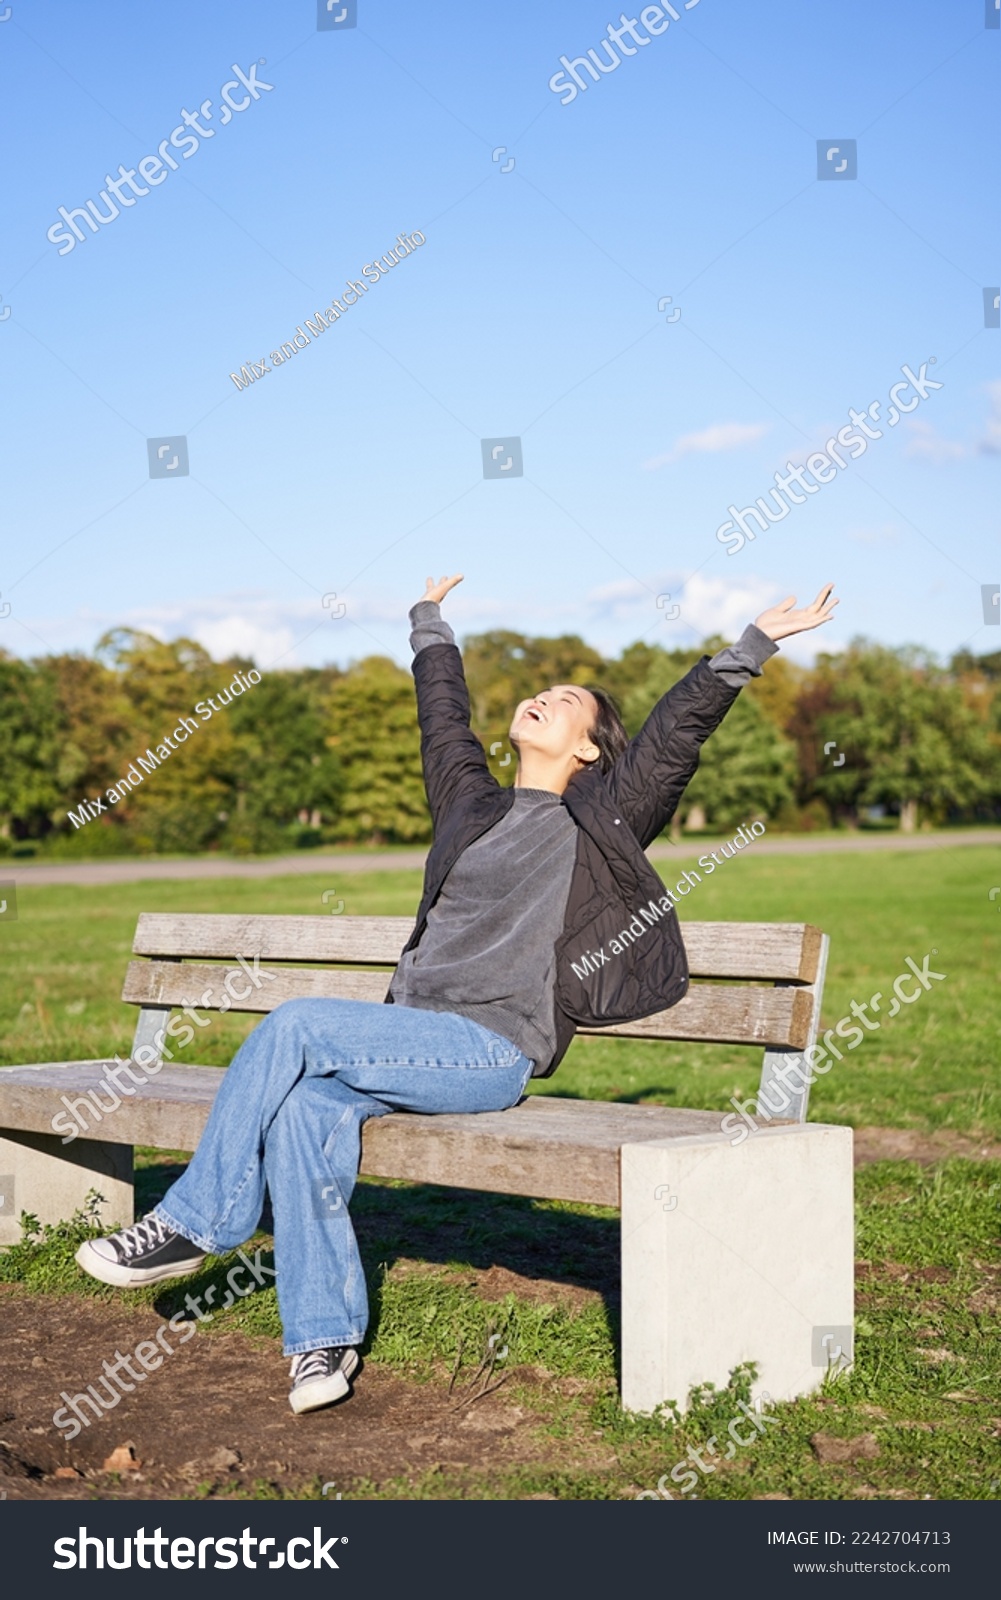 Happy asian woman stretching her hands, sitting on bench with excited face, smiling pleased, feeling freedom, enjoying day in park. #2242704713